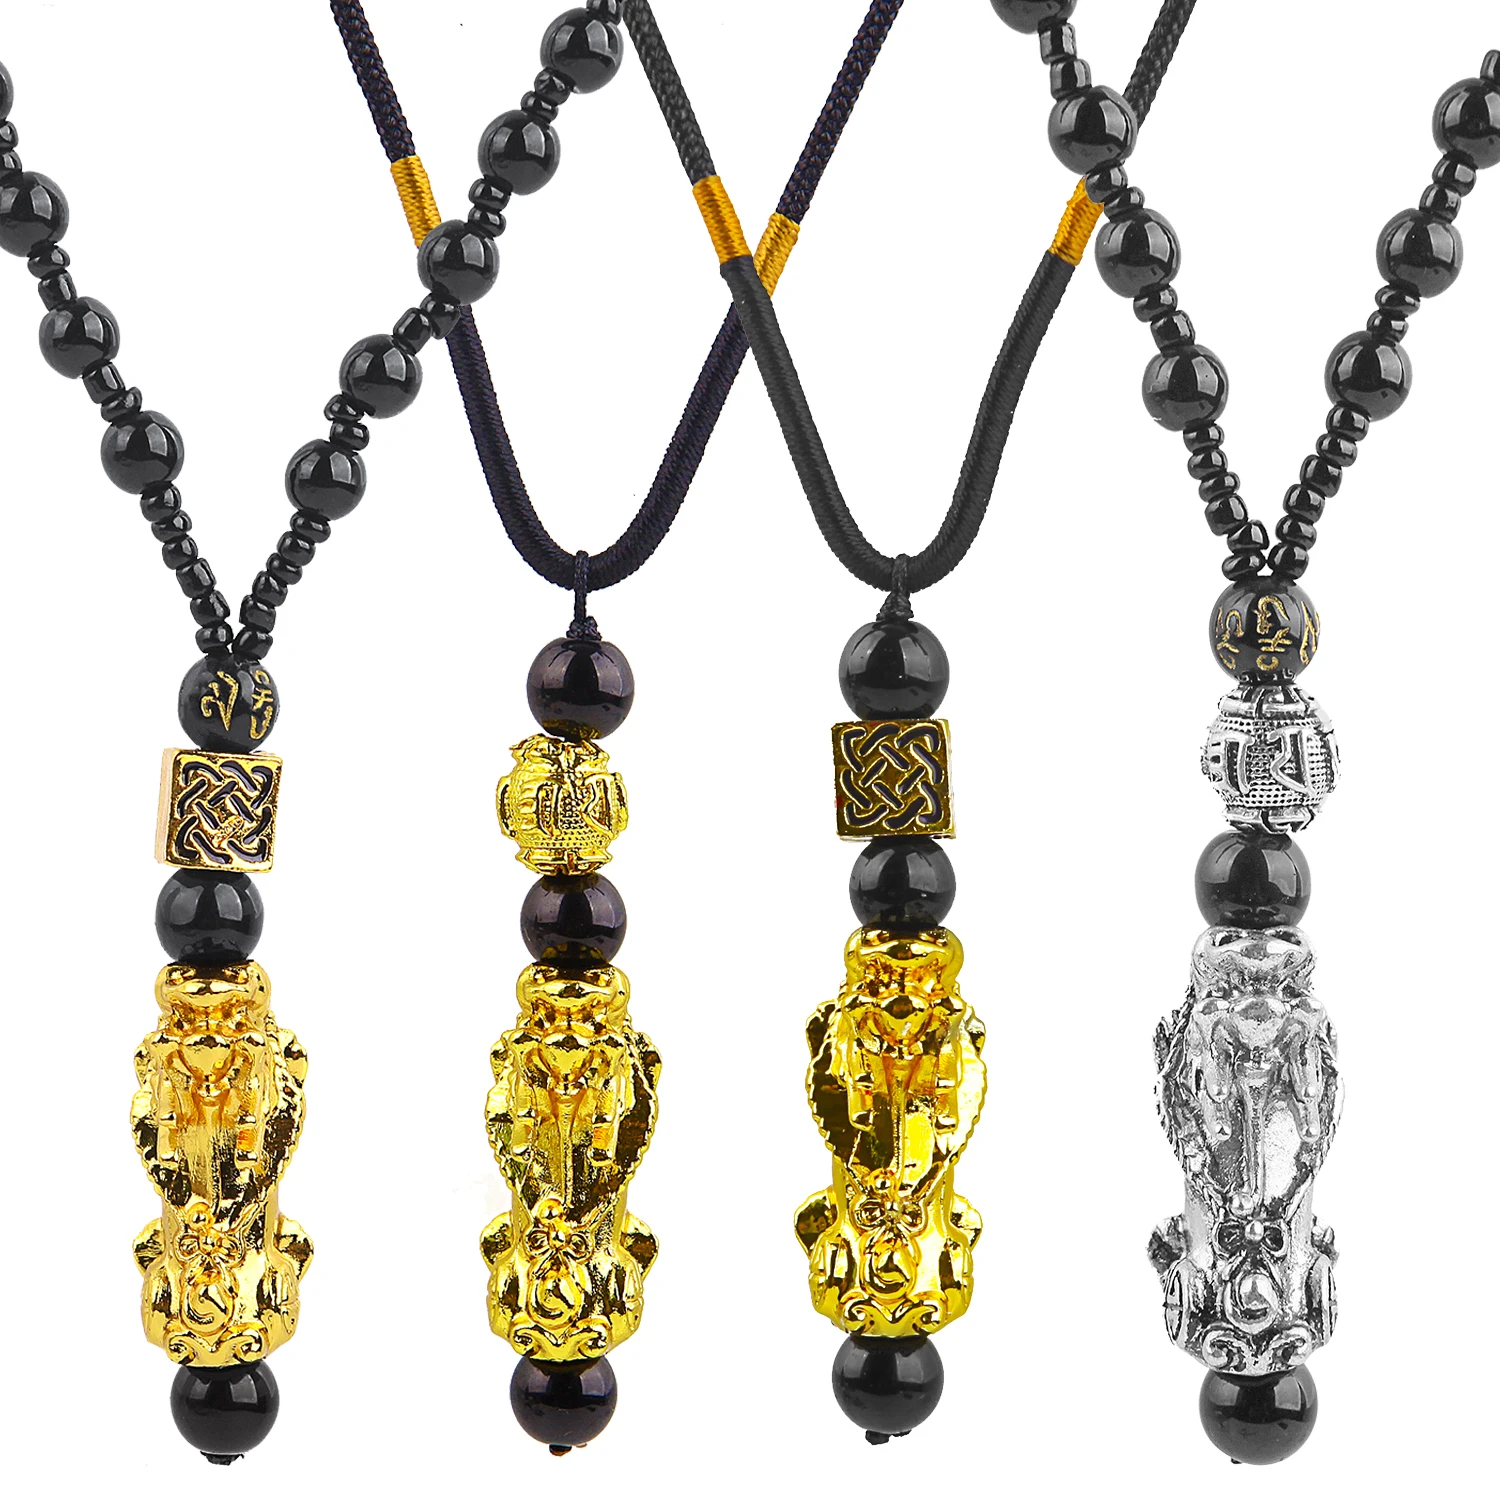 

Vintage Pixiu Pendant Necklace Bring Wealth and Good Luck Charm Necklace Chinese Feng Shui Faith Obsidian Stone Beads Necklaces